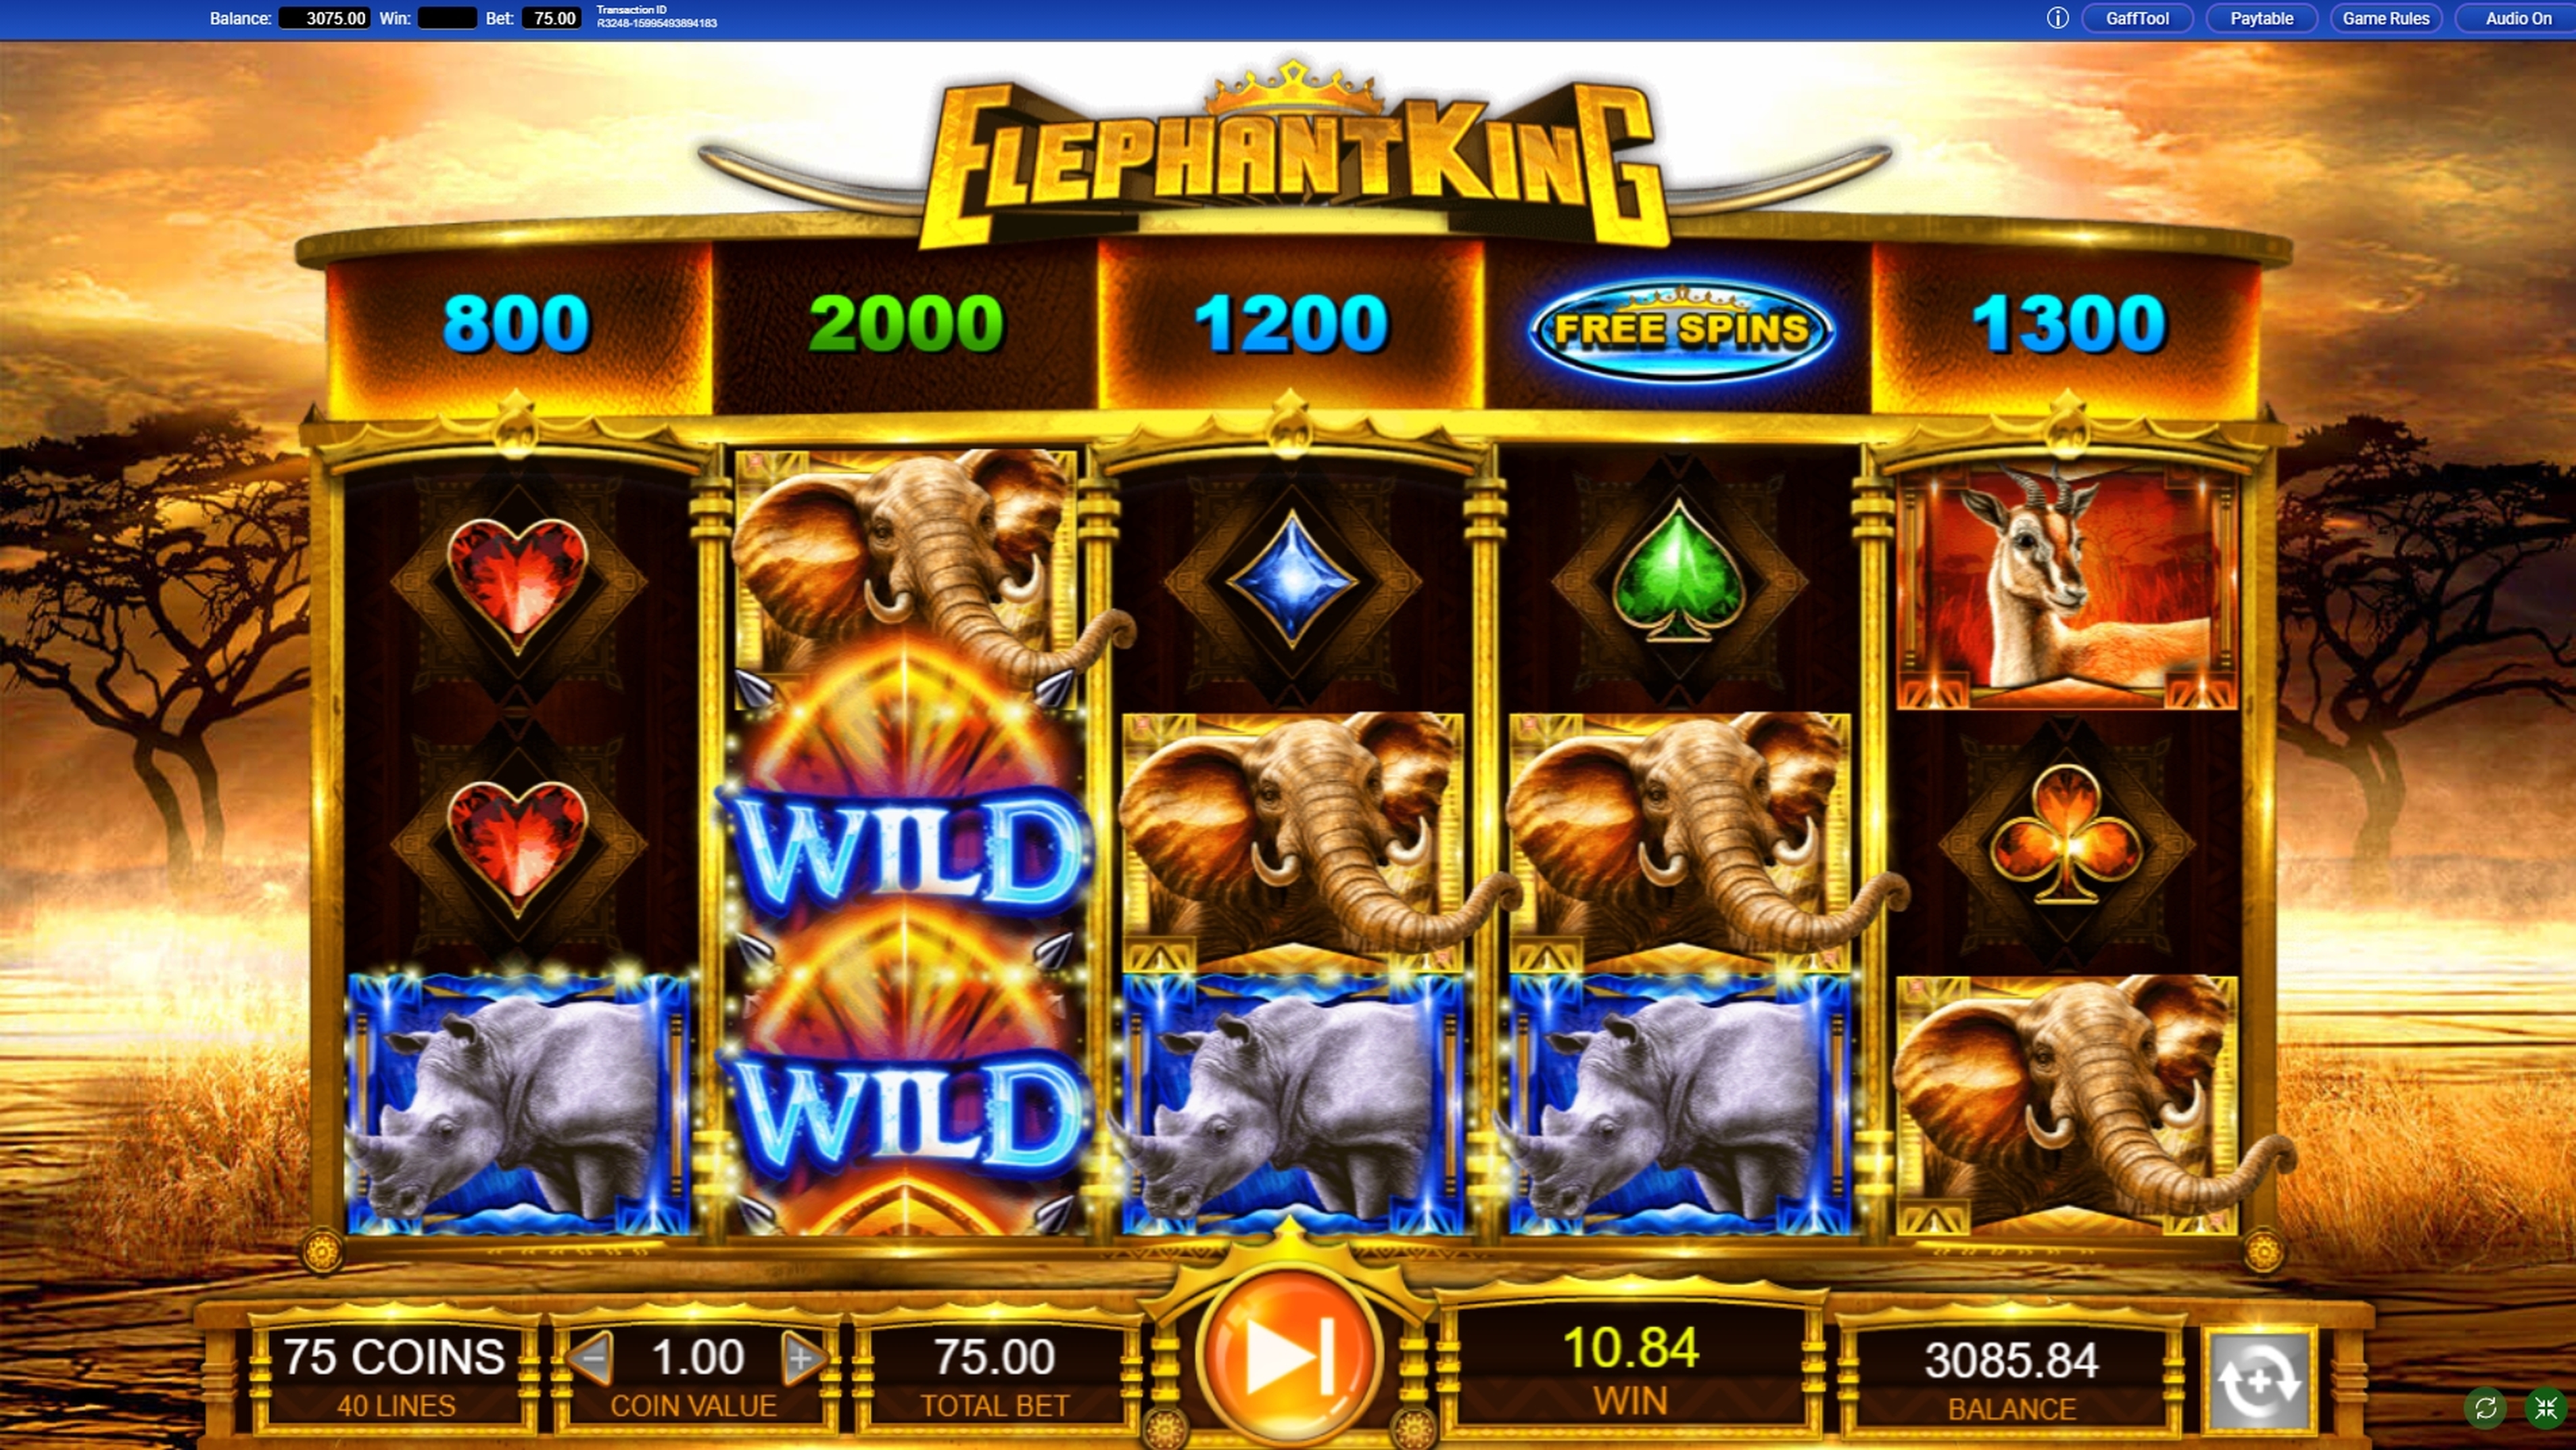 Win Money in Elephant King Free Slot Game by IGT